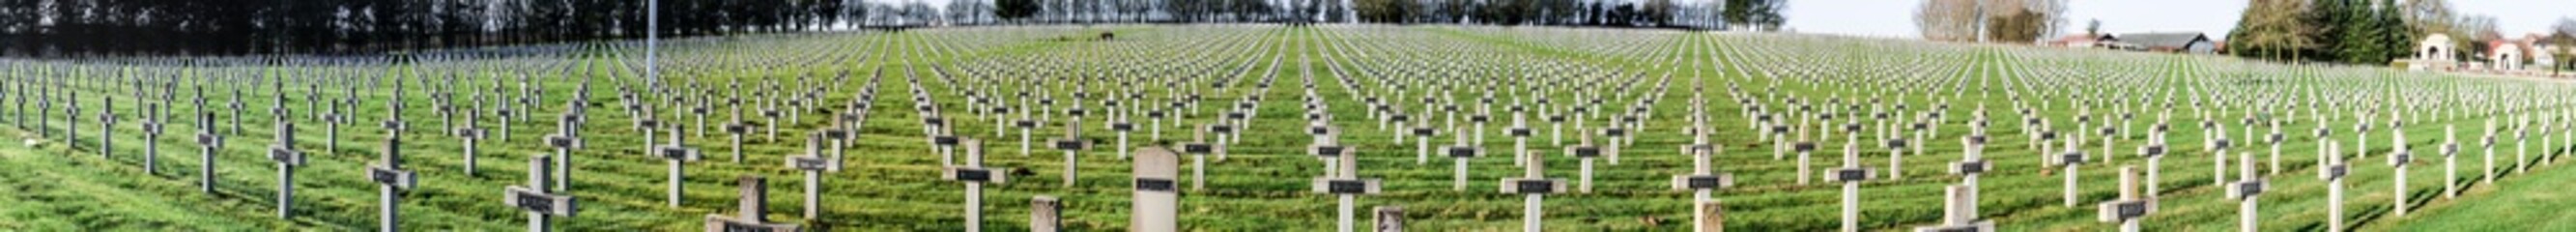 Panorama Cemetery world war one in France Vimy La Targette - 75500980